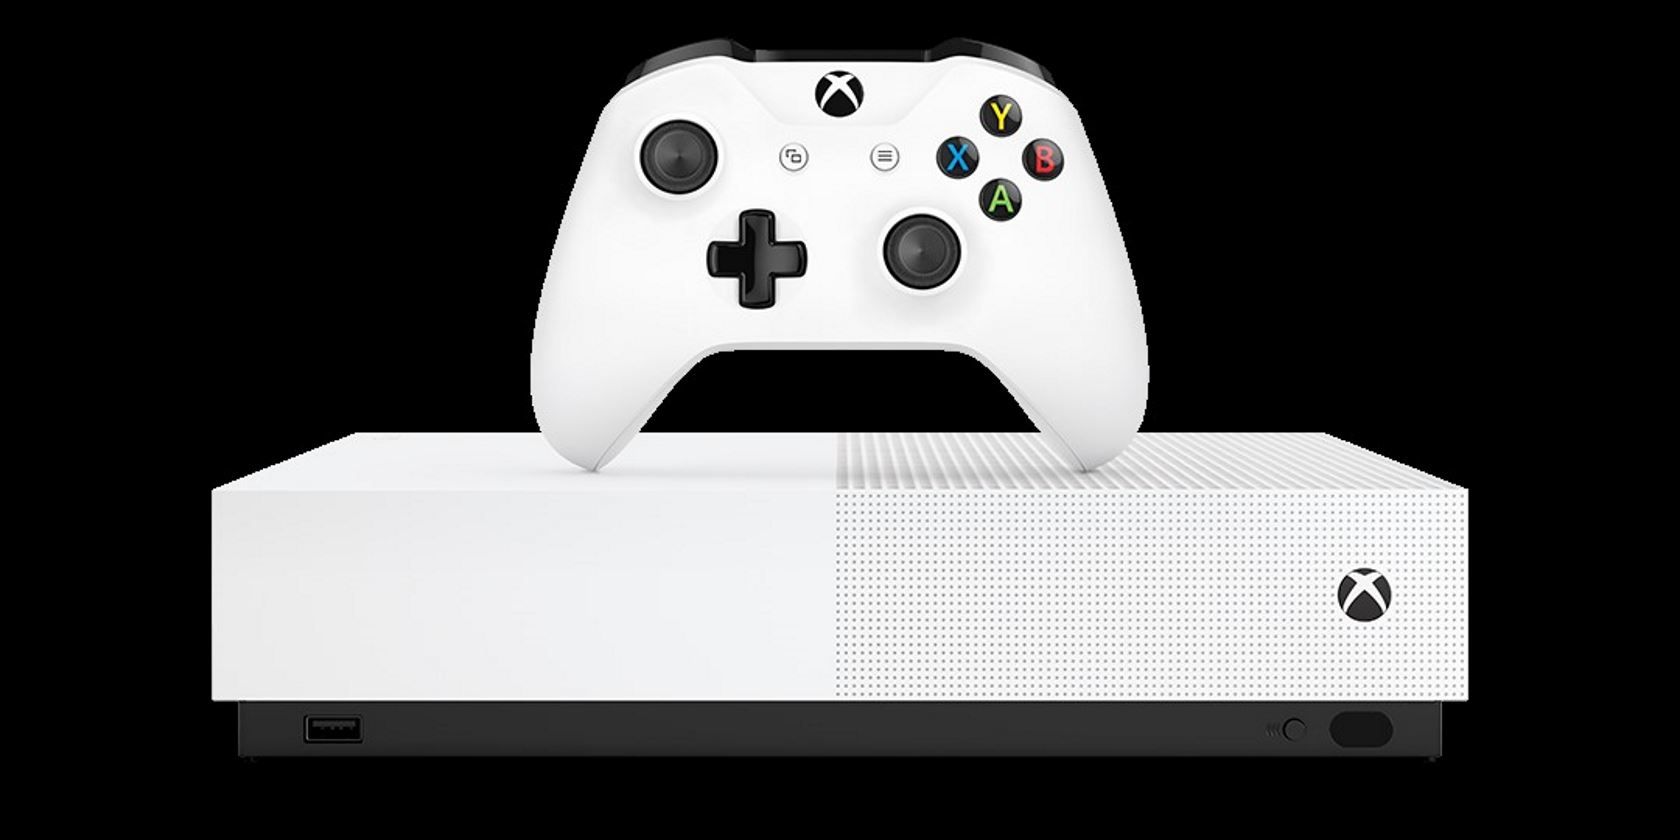 An Xbox One console